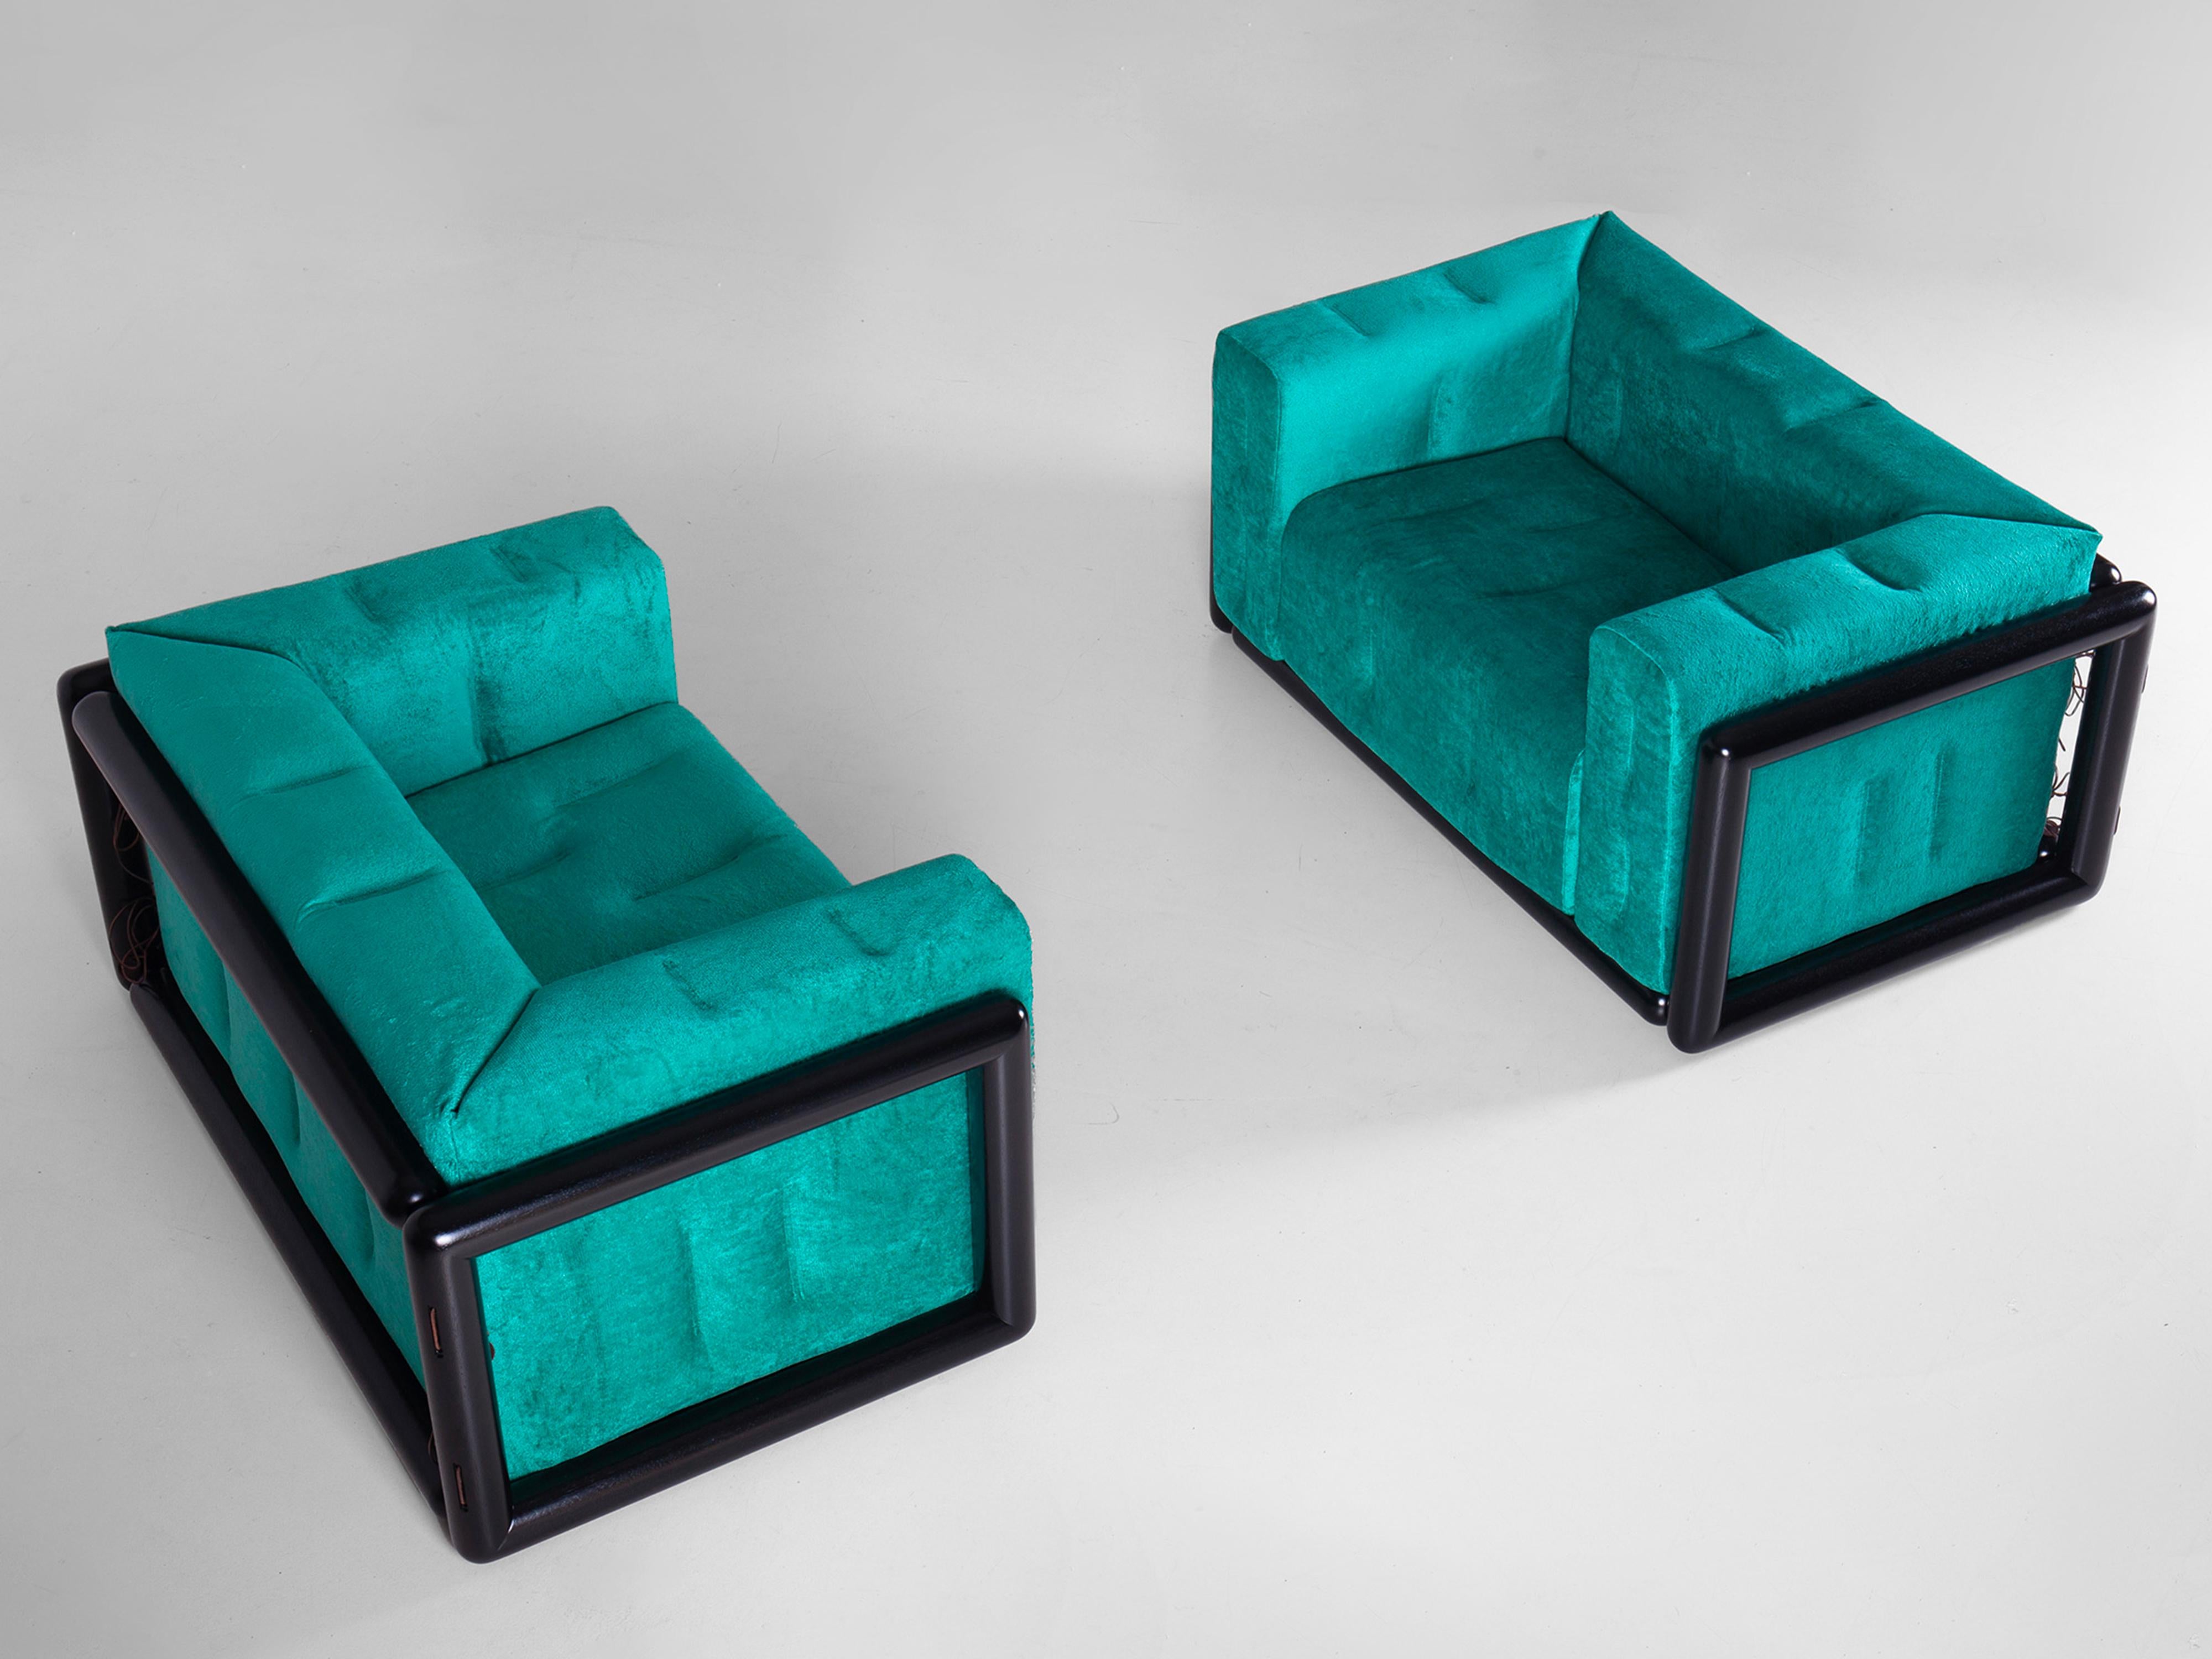 Pair of Cornaro 140 armchairs designed by Carlo Scarpa. Solid hardwood structure (iroko). Polyurethane padding. Upholstery in original chenille velvet. The one-unit side and back cushion is fastened to the frame corners.

At the beginning of the